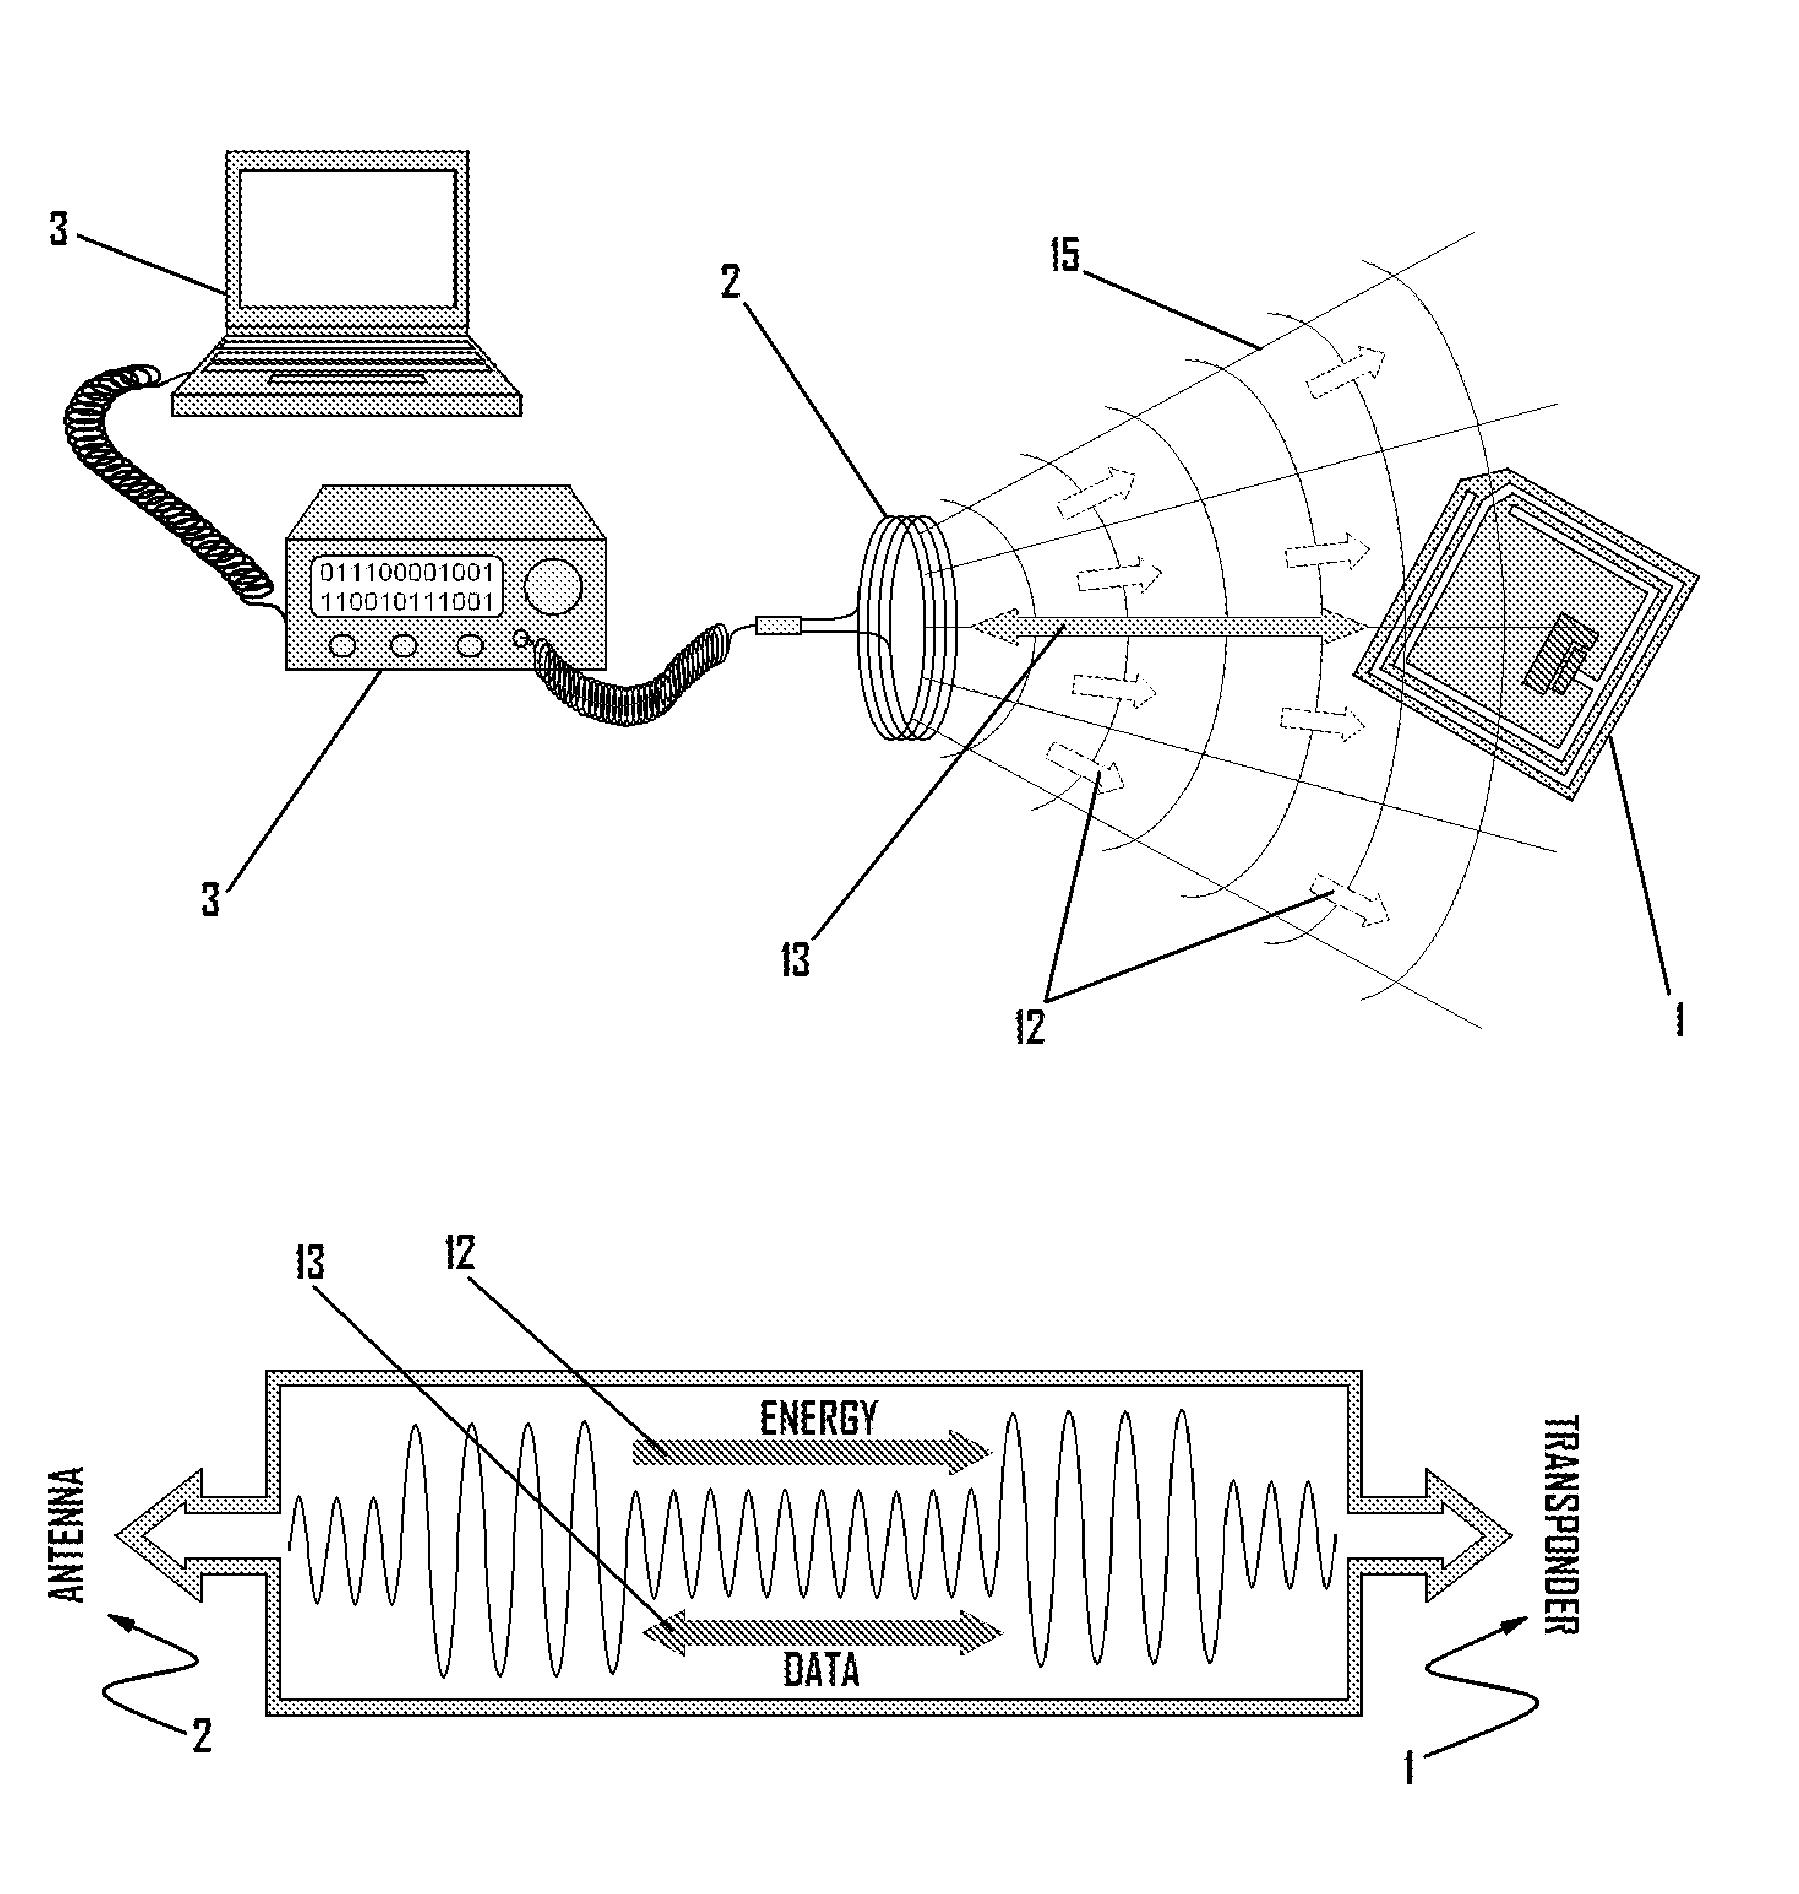 Device, system and method for the location and identification of as-built plants of pipes, conduits, cables or hidden objects